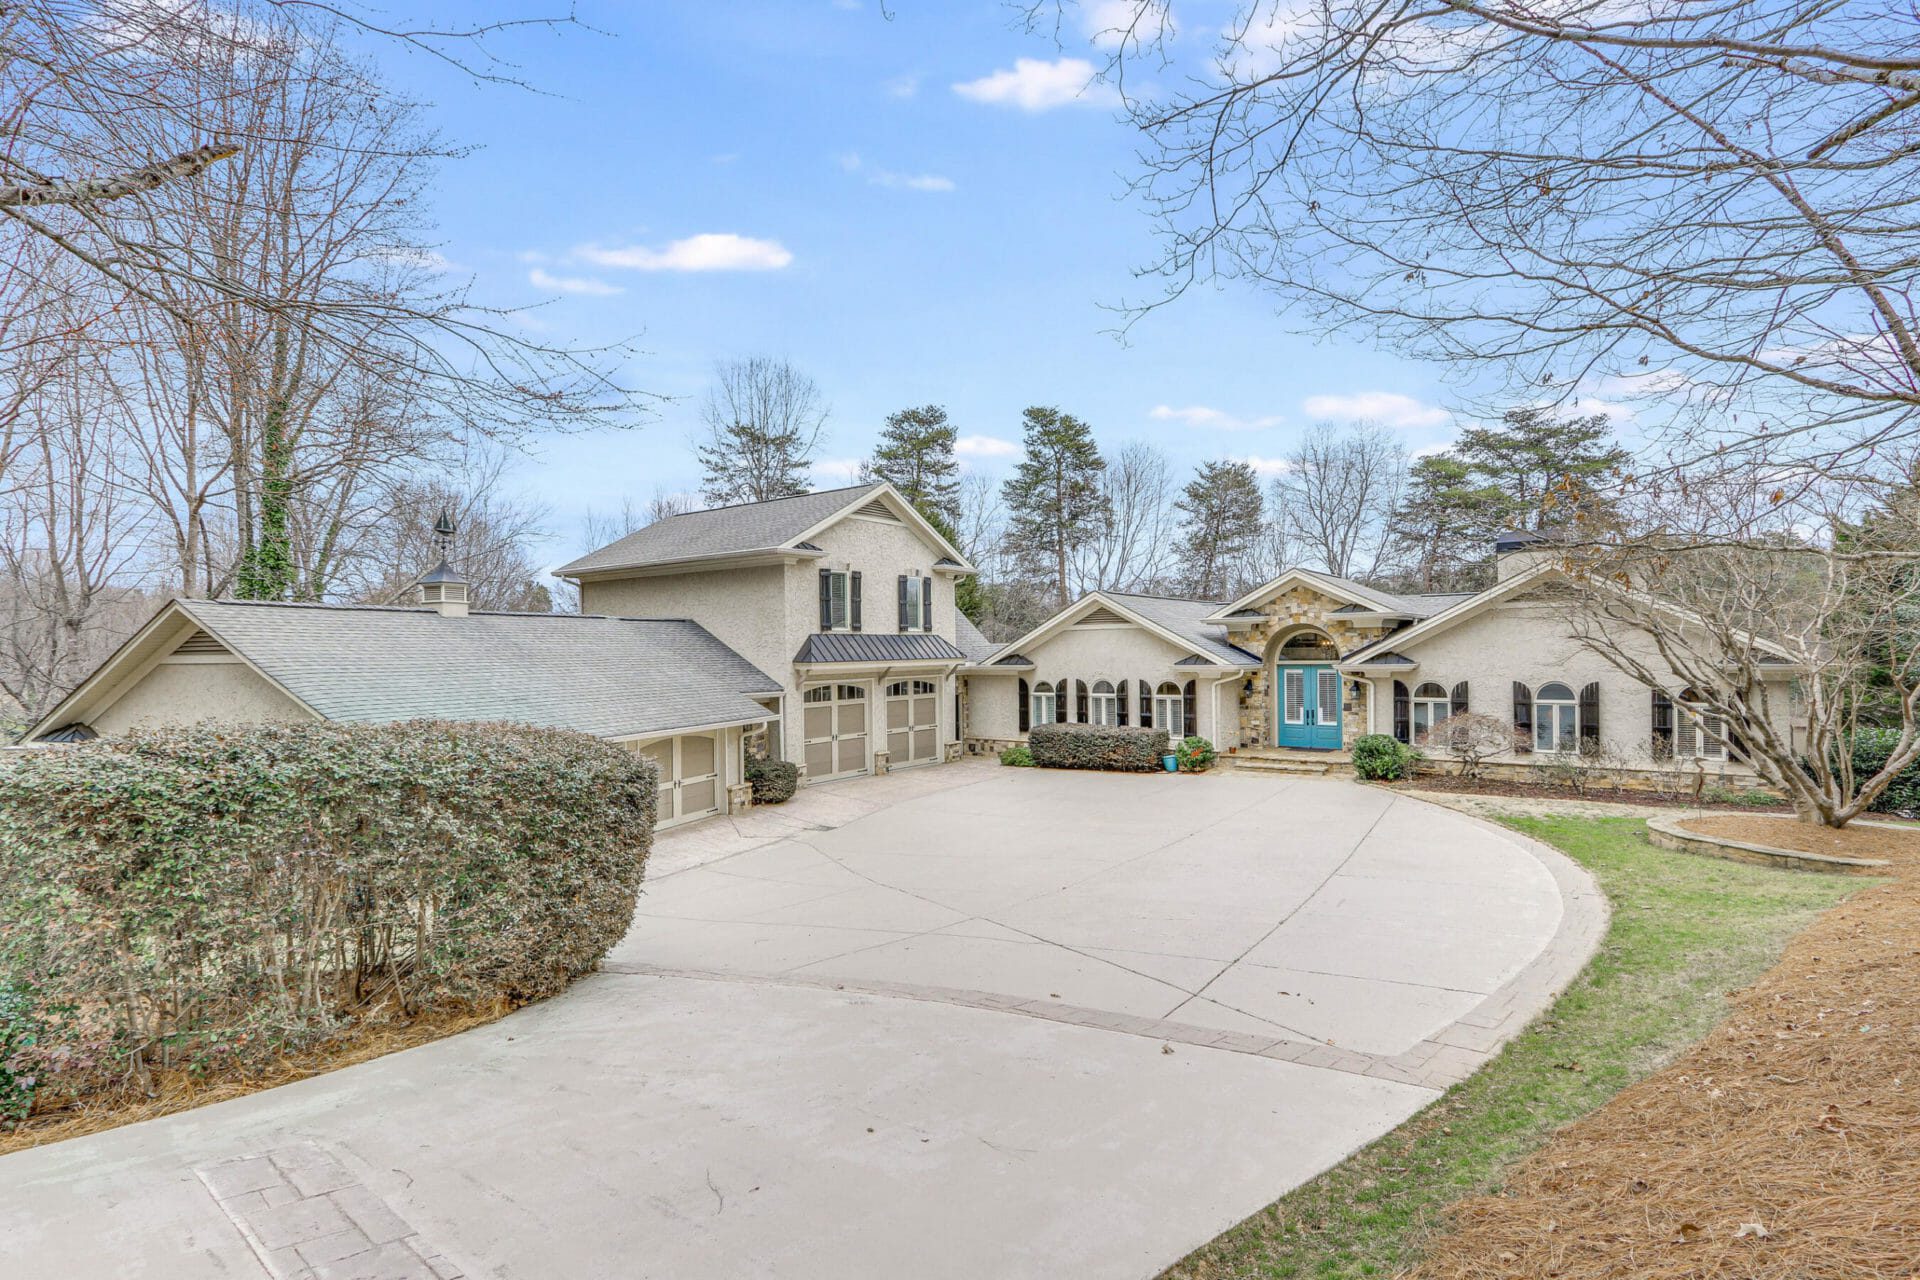 Large ranch style home with teal front door on Lake Lanier